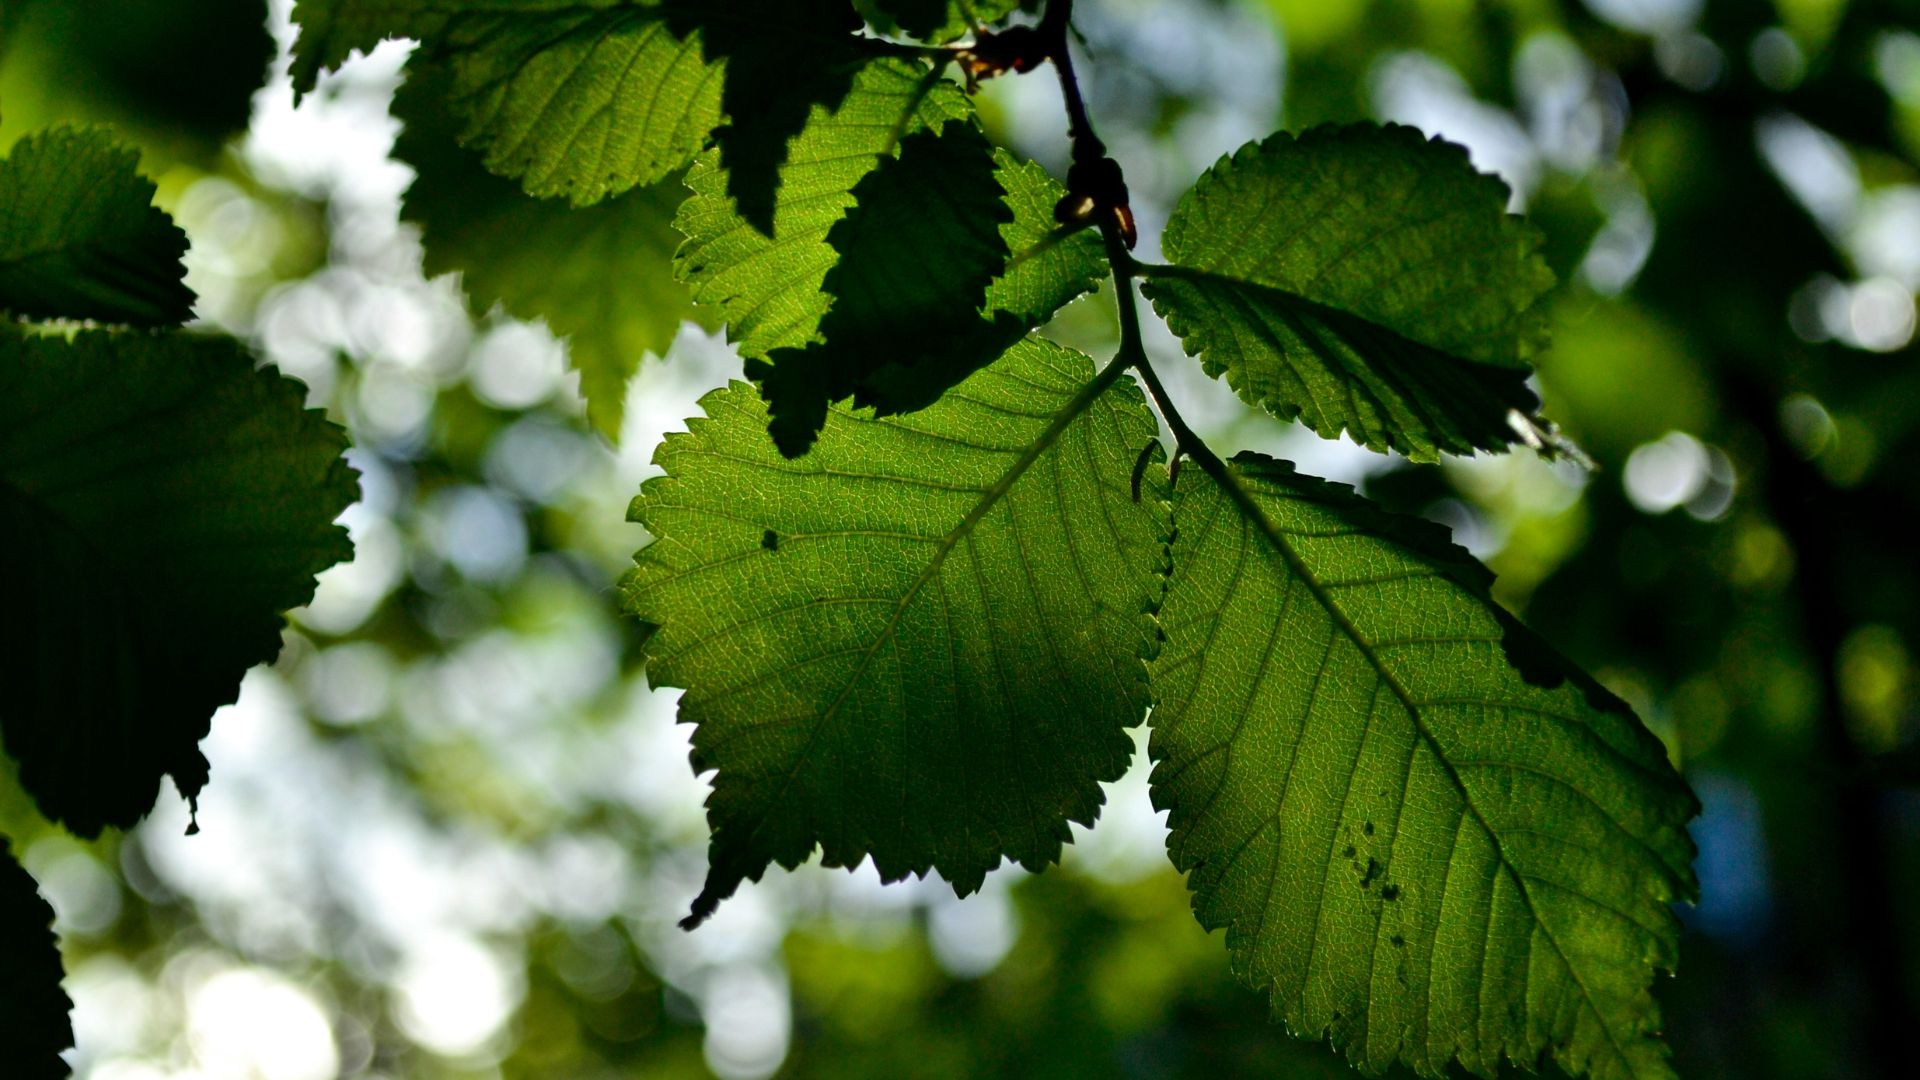 close-up image of the sun shining behind a few leaves in a tree, revealing all of the leaves' veins